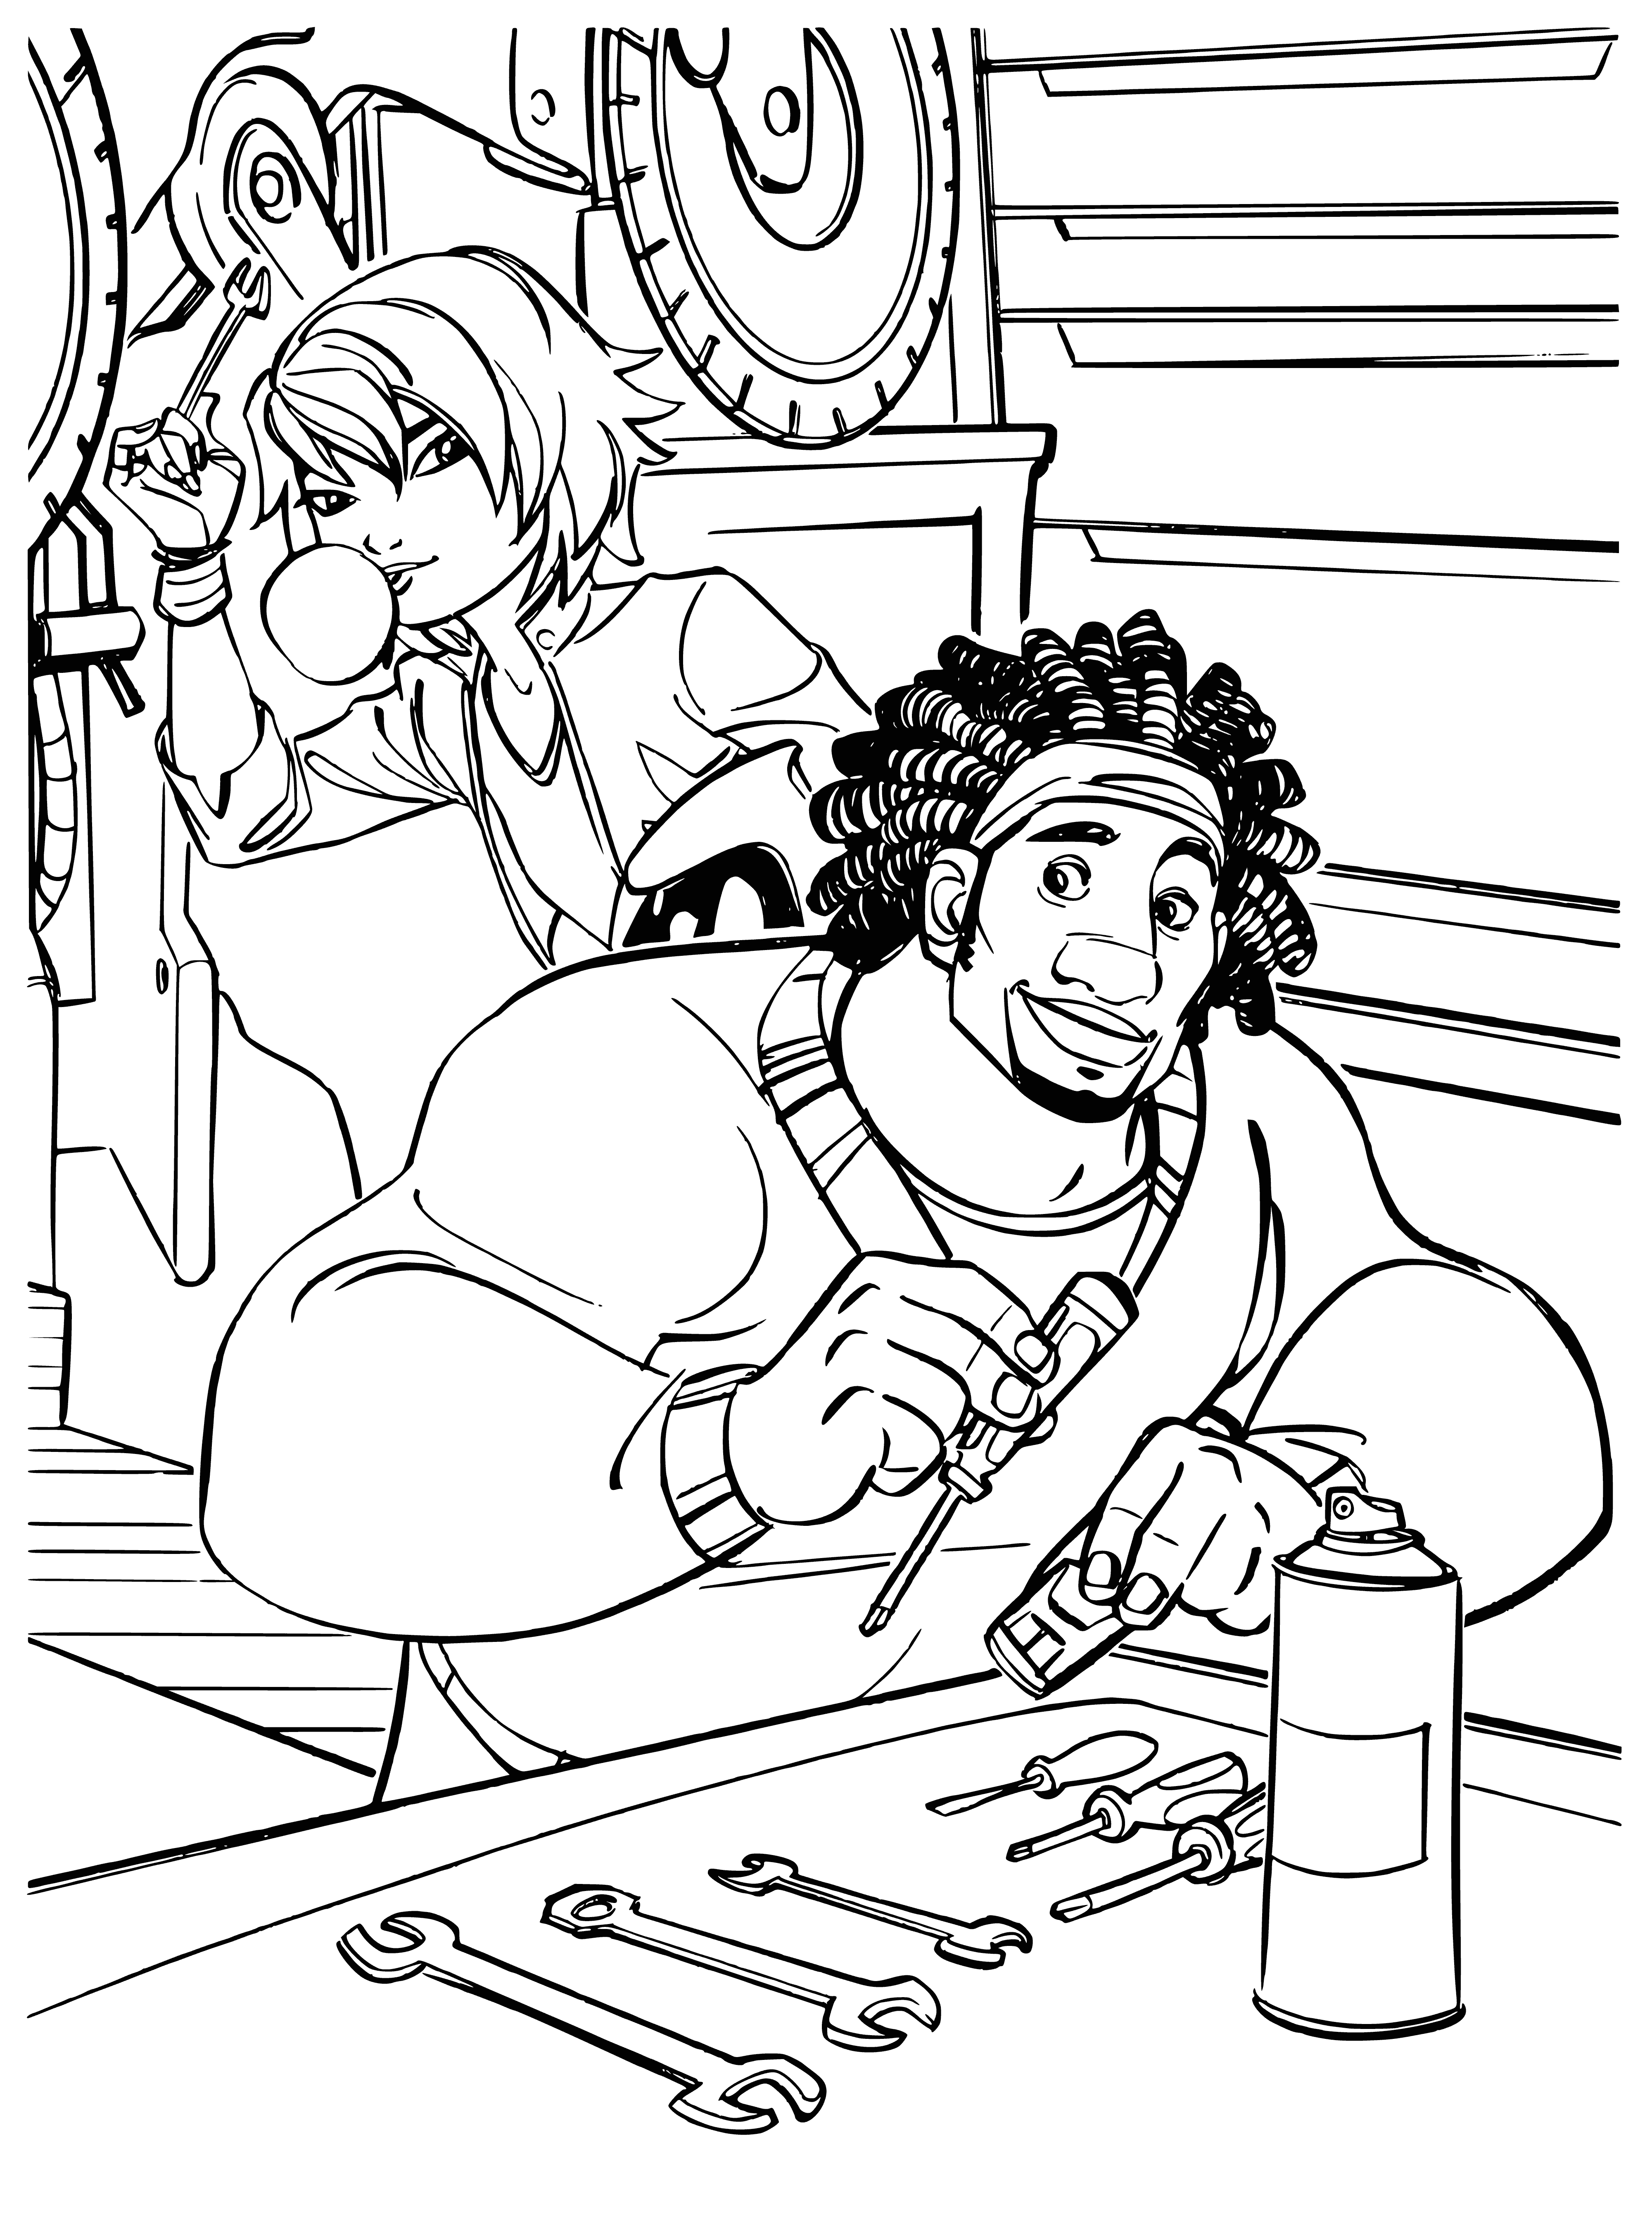 coloring page: Two youngsters with green & black hair, wearing red & white uniforms, holding a sword & fan, looking off into the distance. #ColoringPage